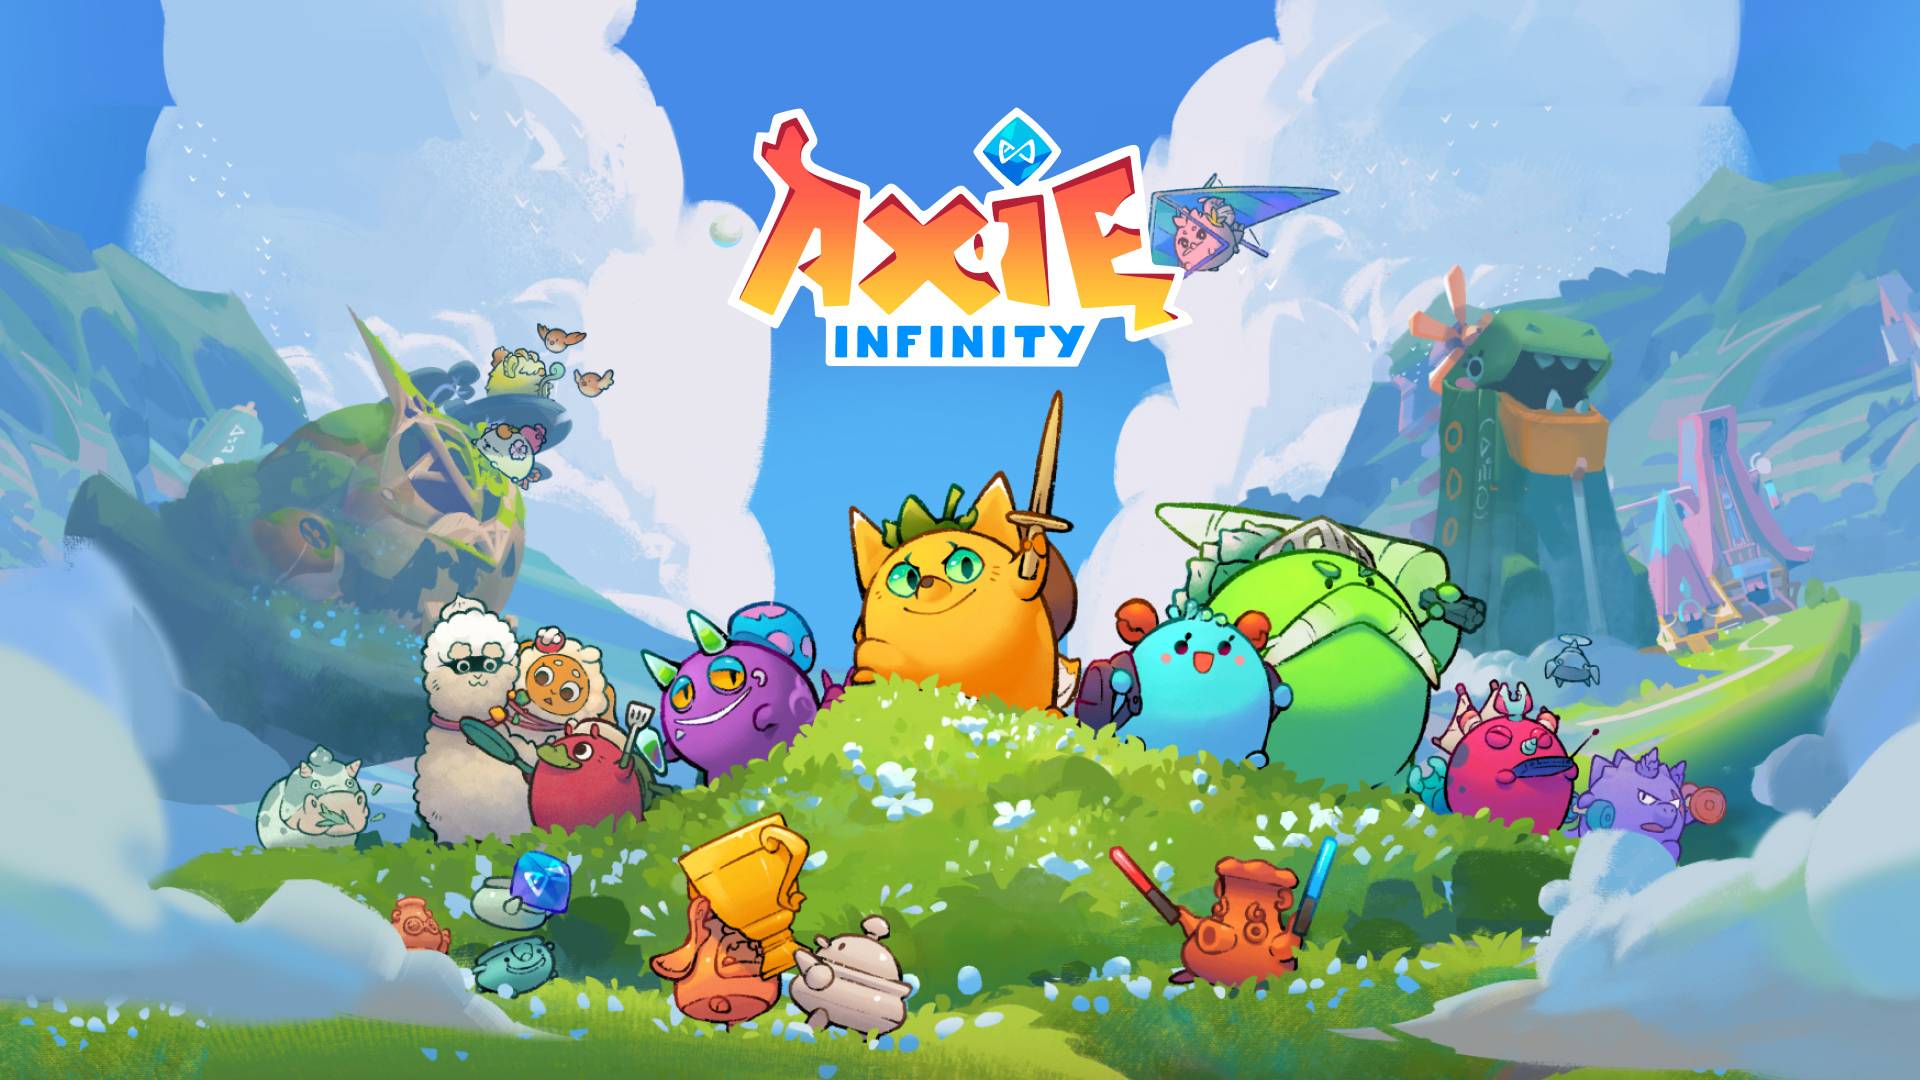 Fortune Slips, Blockchain Technology, and a Bright Future: Axie Infinity Shows Off Features